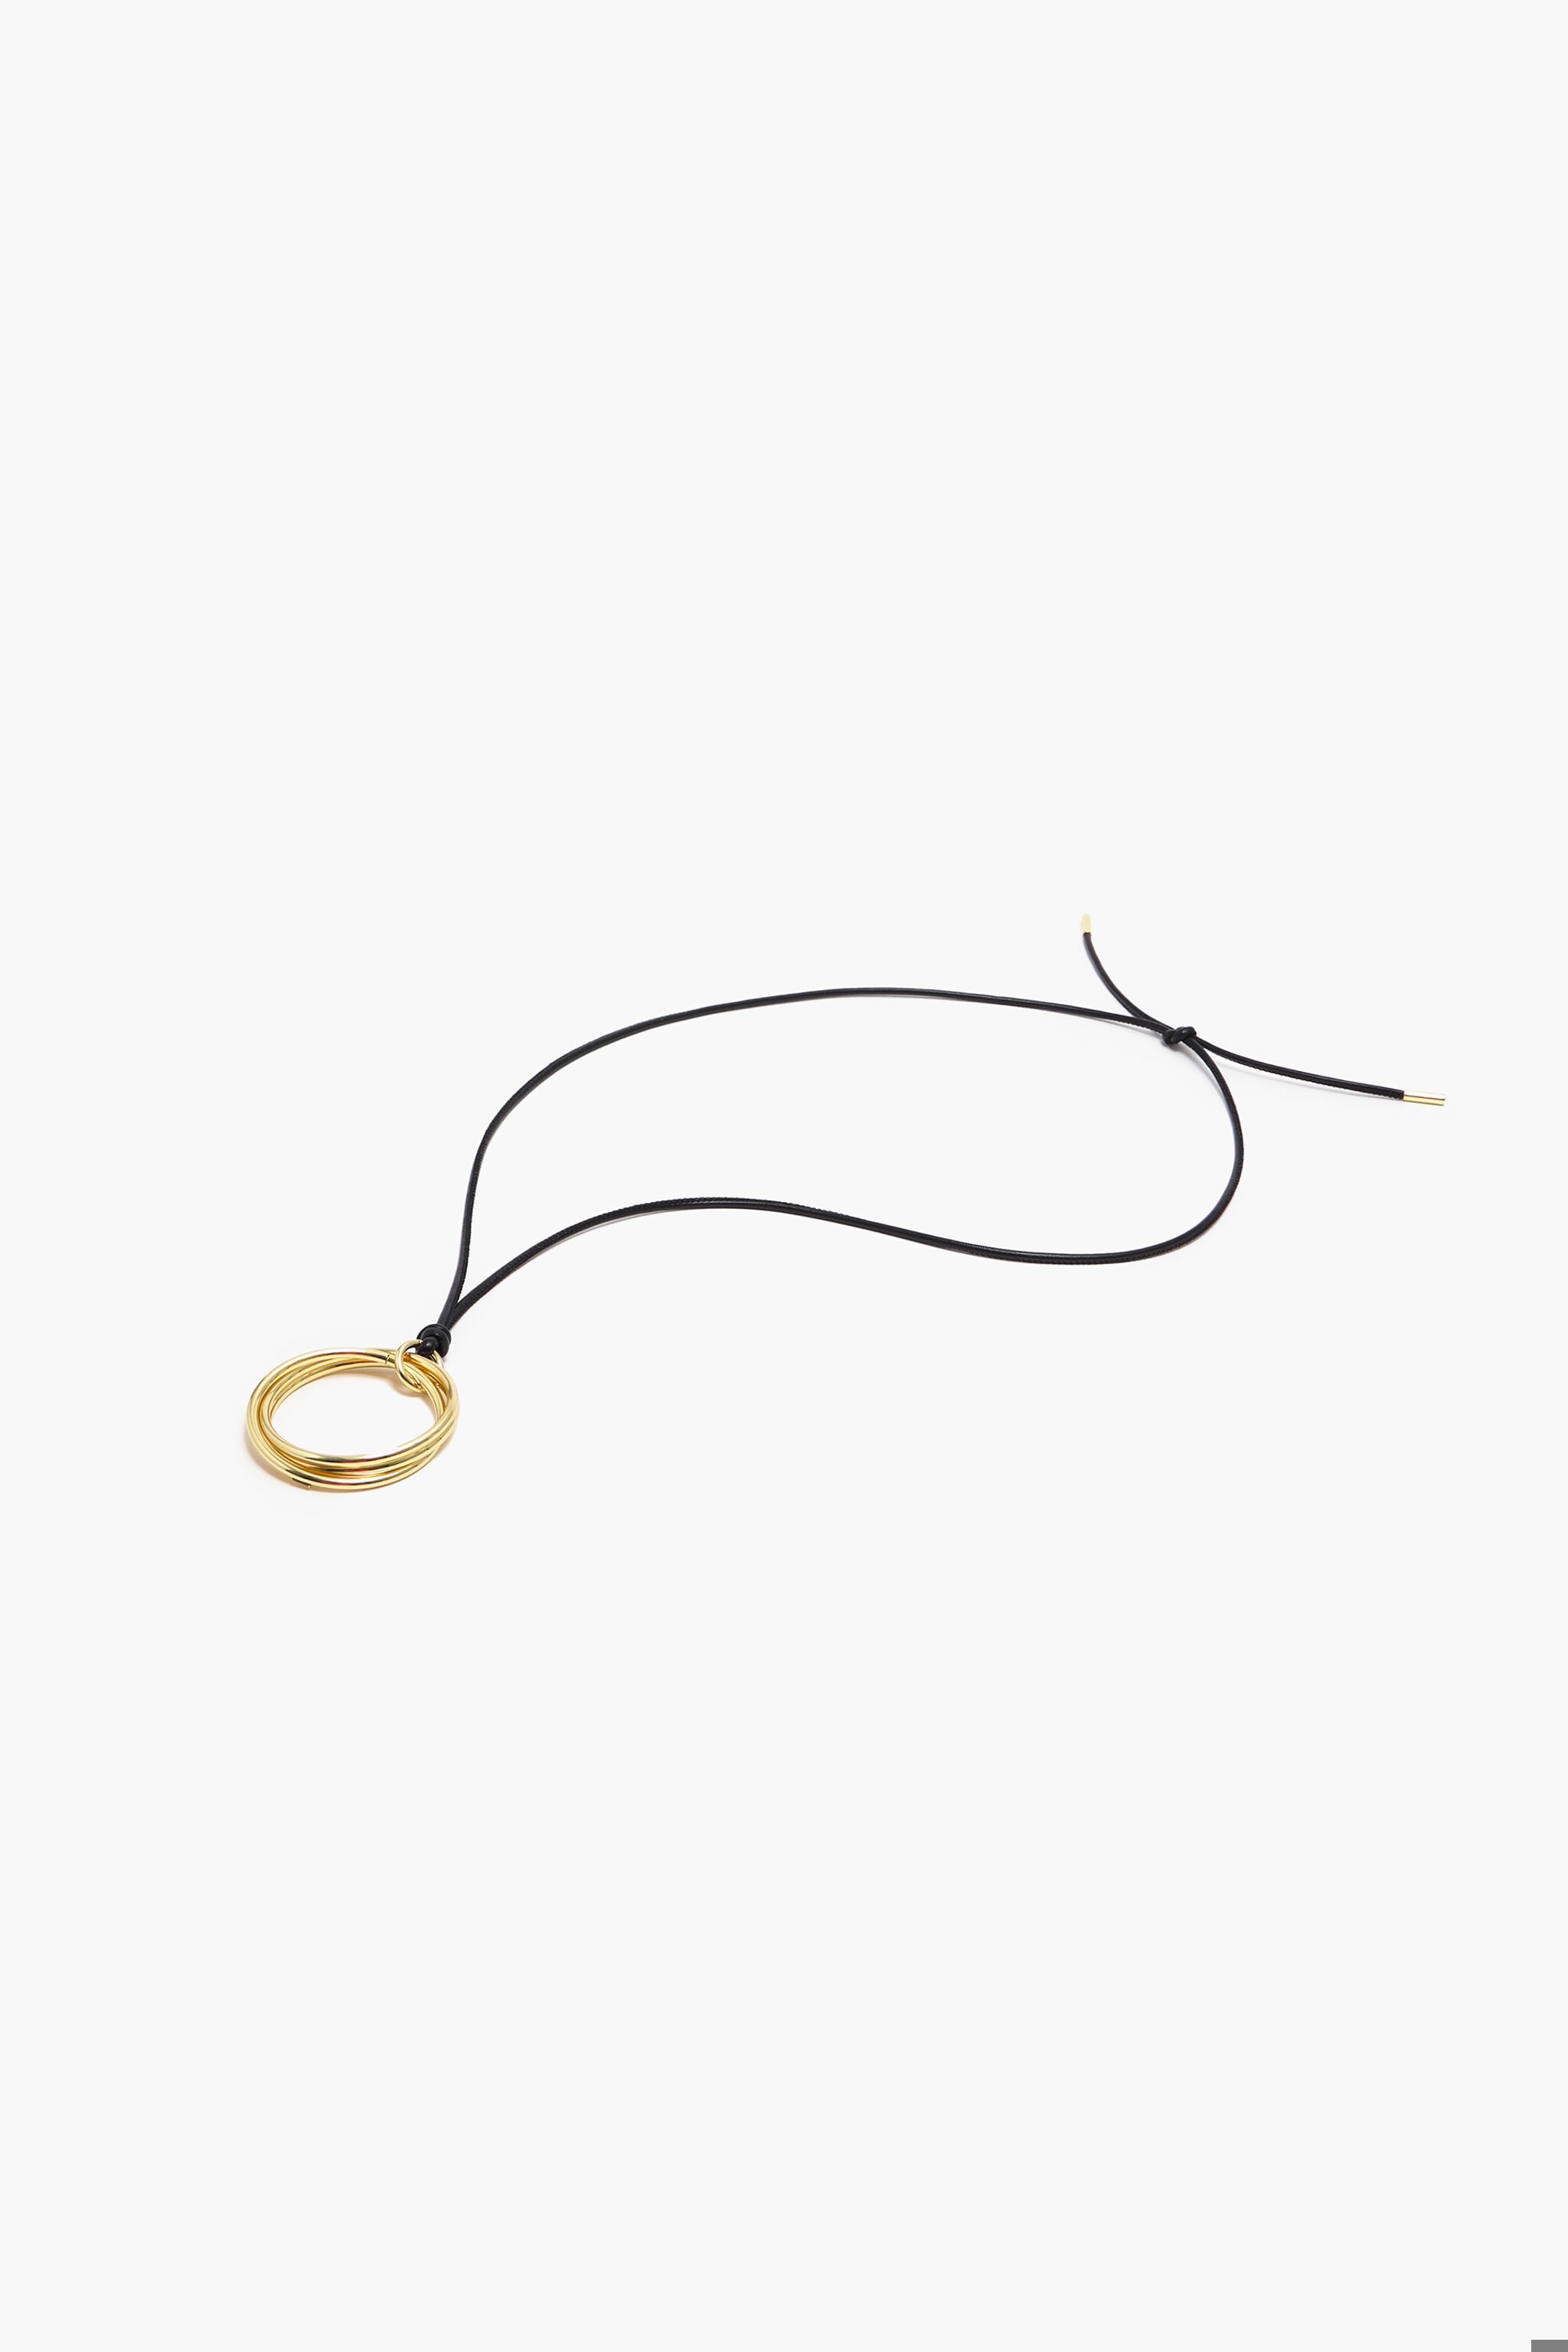 Gravel | Stainless Steel Whale Tail Cord Necklace | In stock! | Lucleon